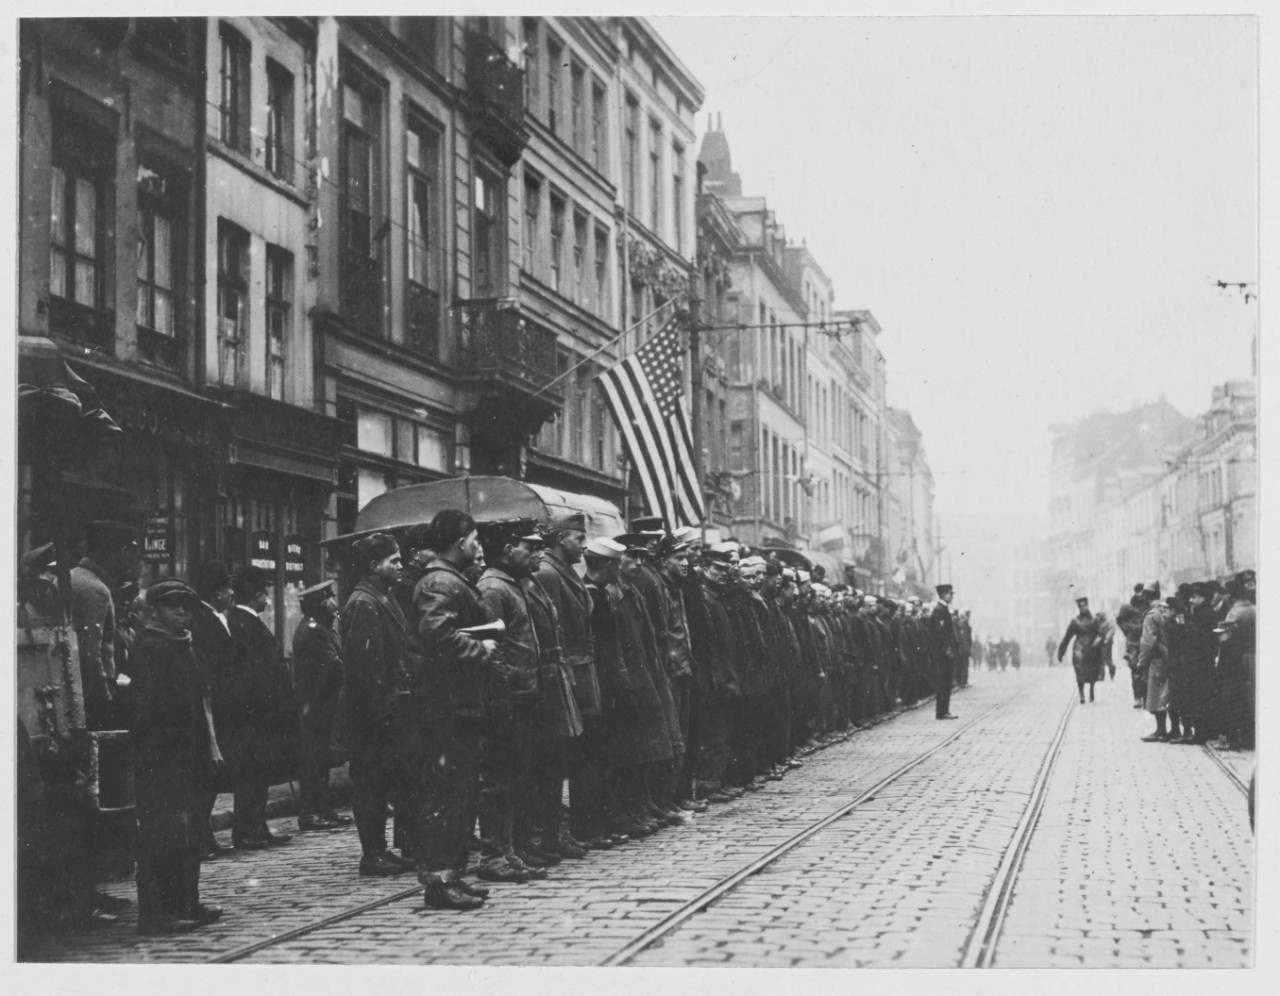 U.S. Navy men at Navy relief headquarters, Lille, France during World War I